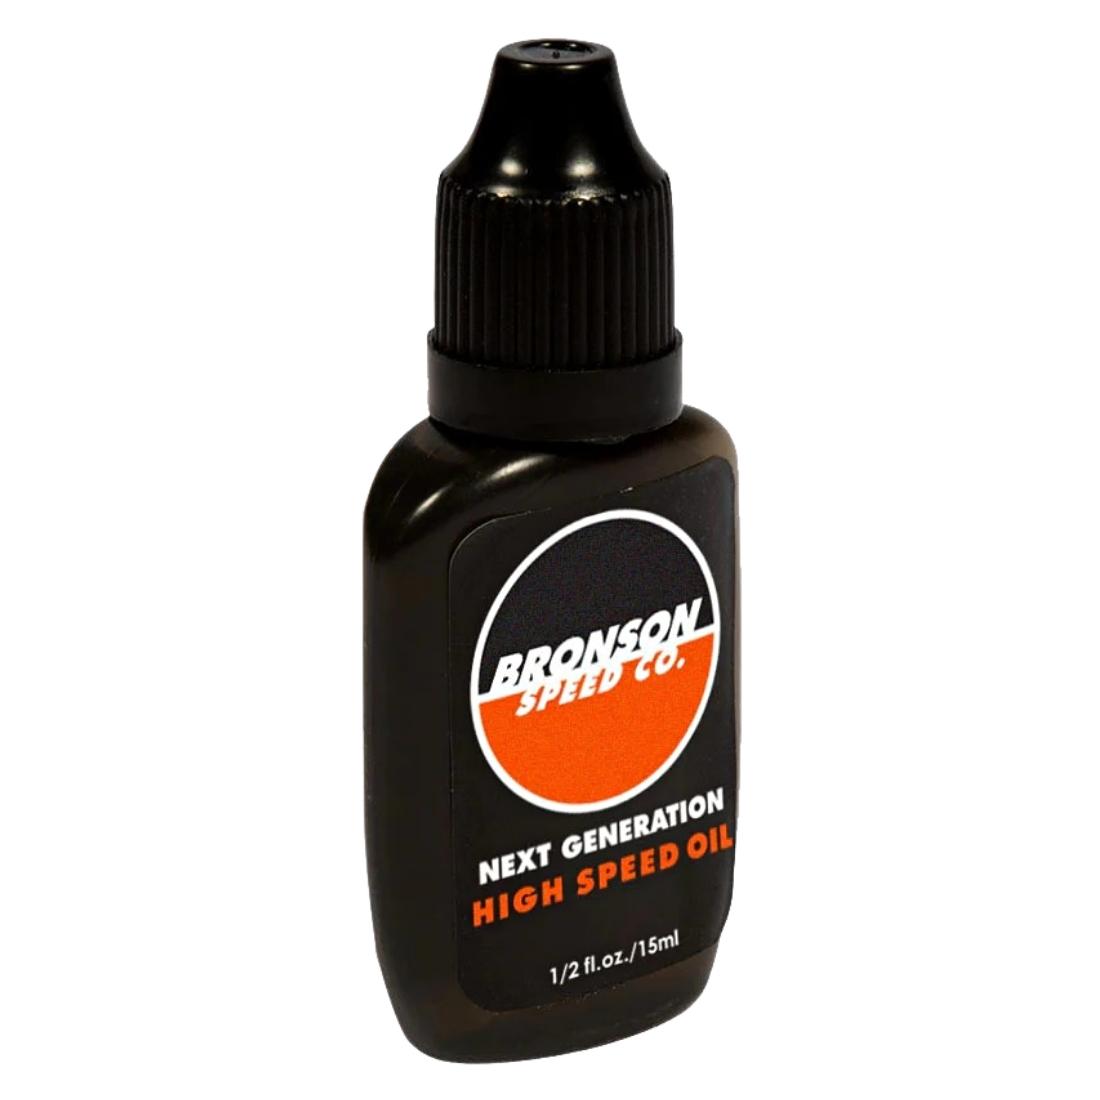 Bronson Speed Co Next Generation High Speed Bearing Oil Lubricant - Black/Orange - Gifts for Skateboarders by Bronson Speed Co